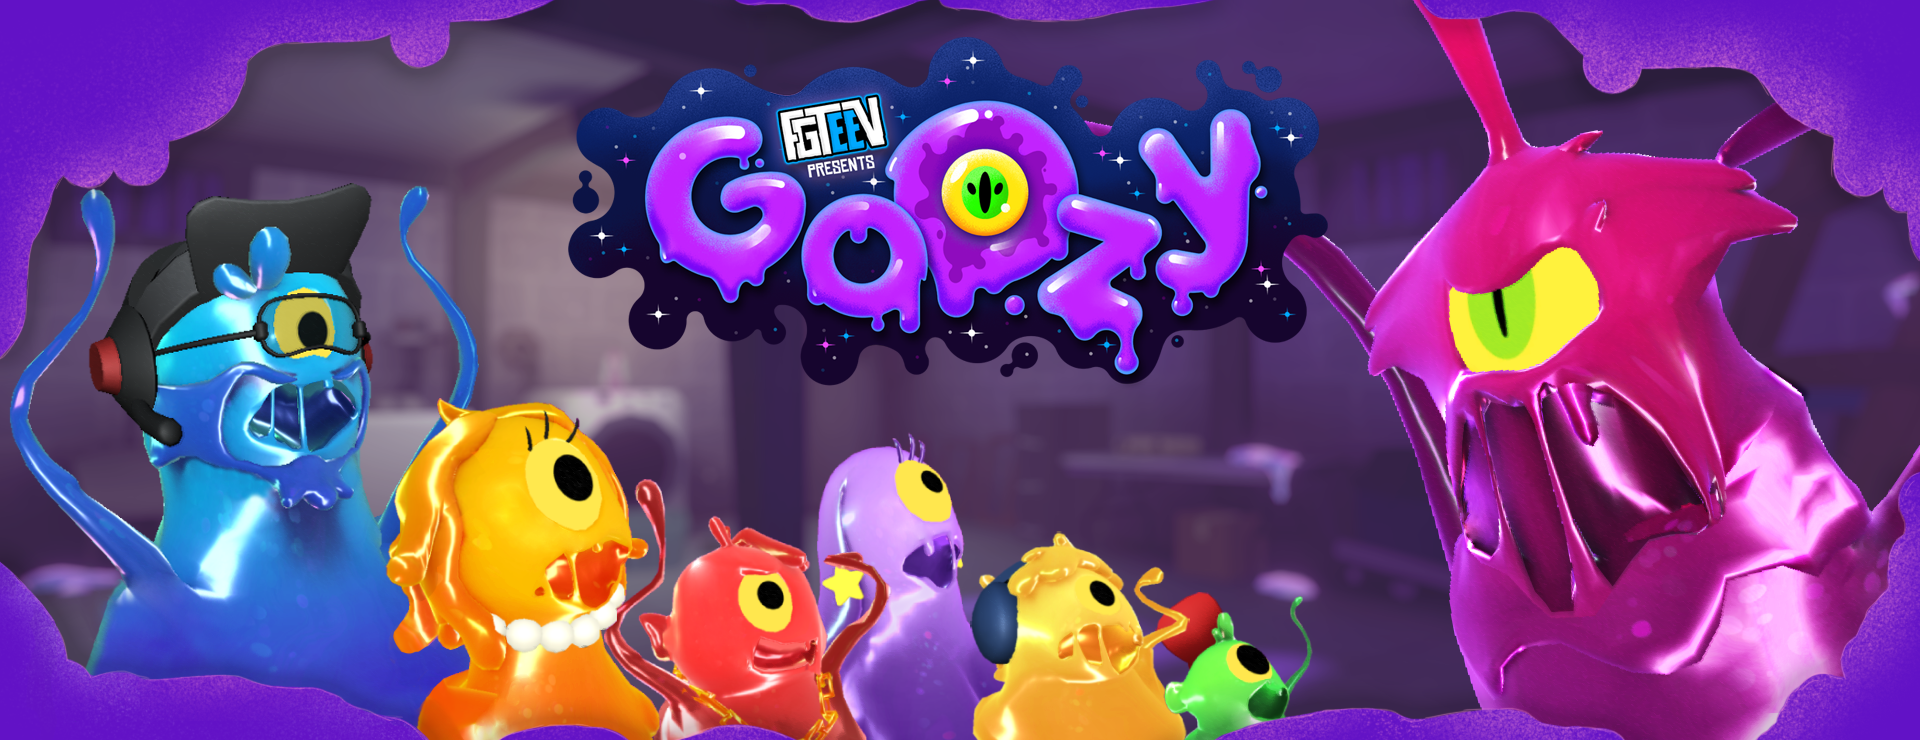 Welcome everyone to the official goozy subreddit! I hope you will have a great time here!